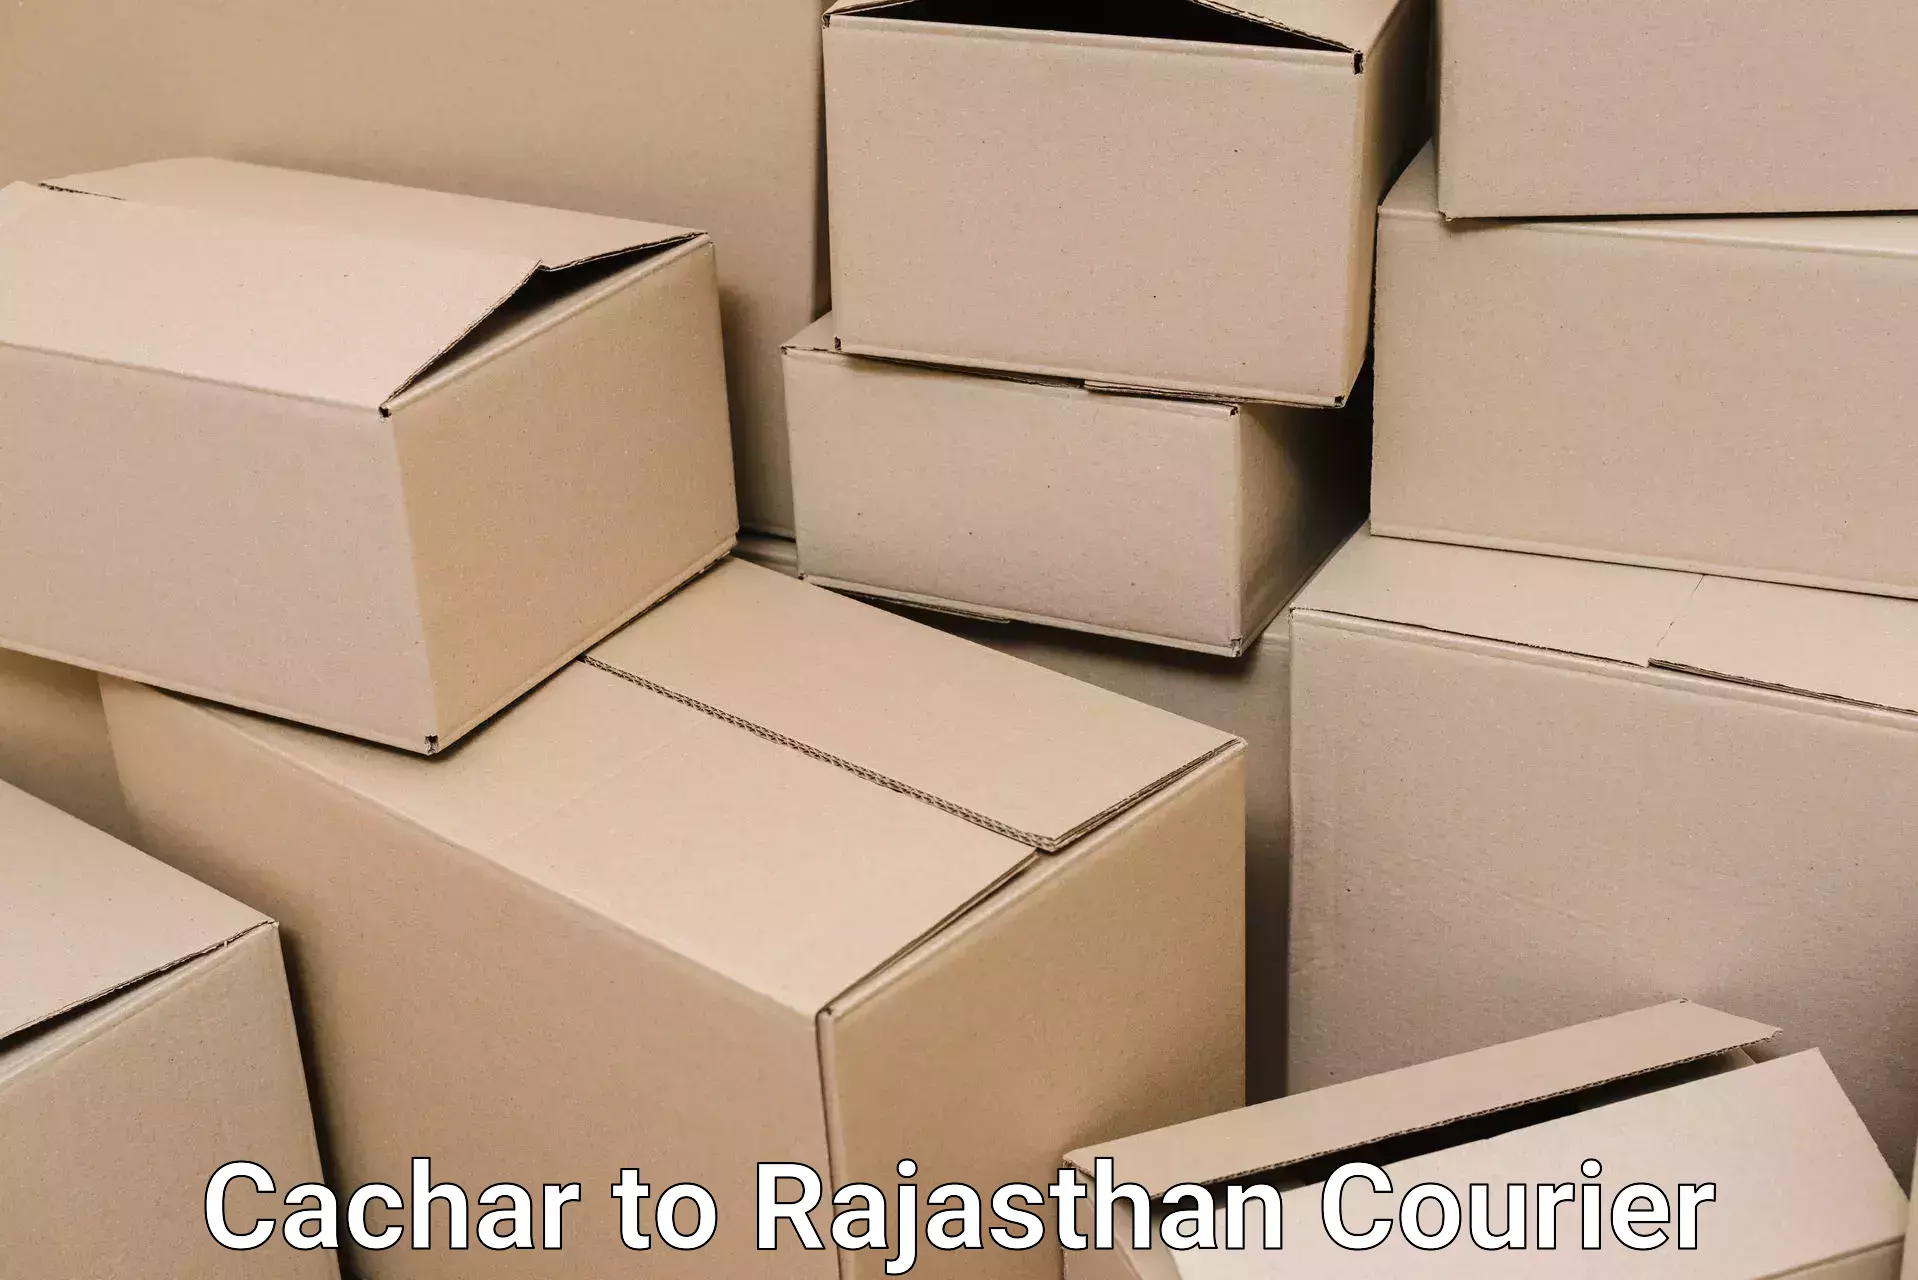 Professional goods transport Cachar to Rajasthan